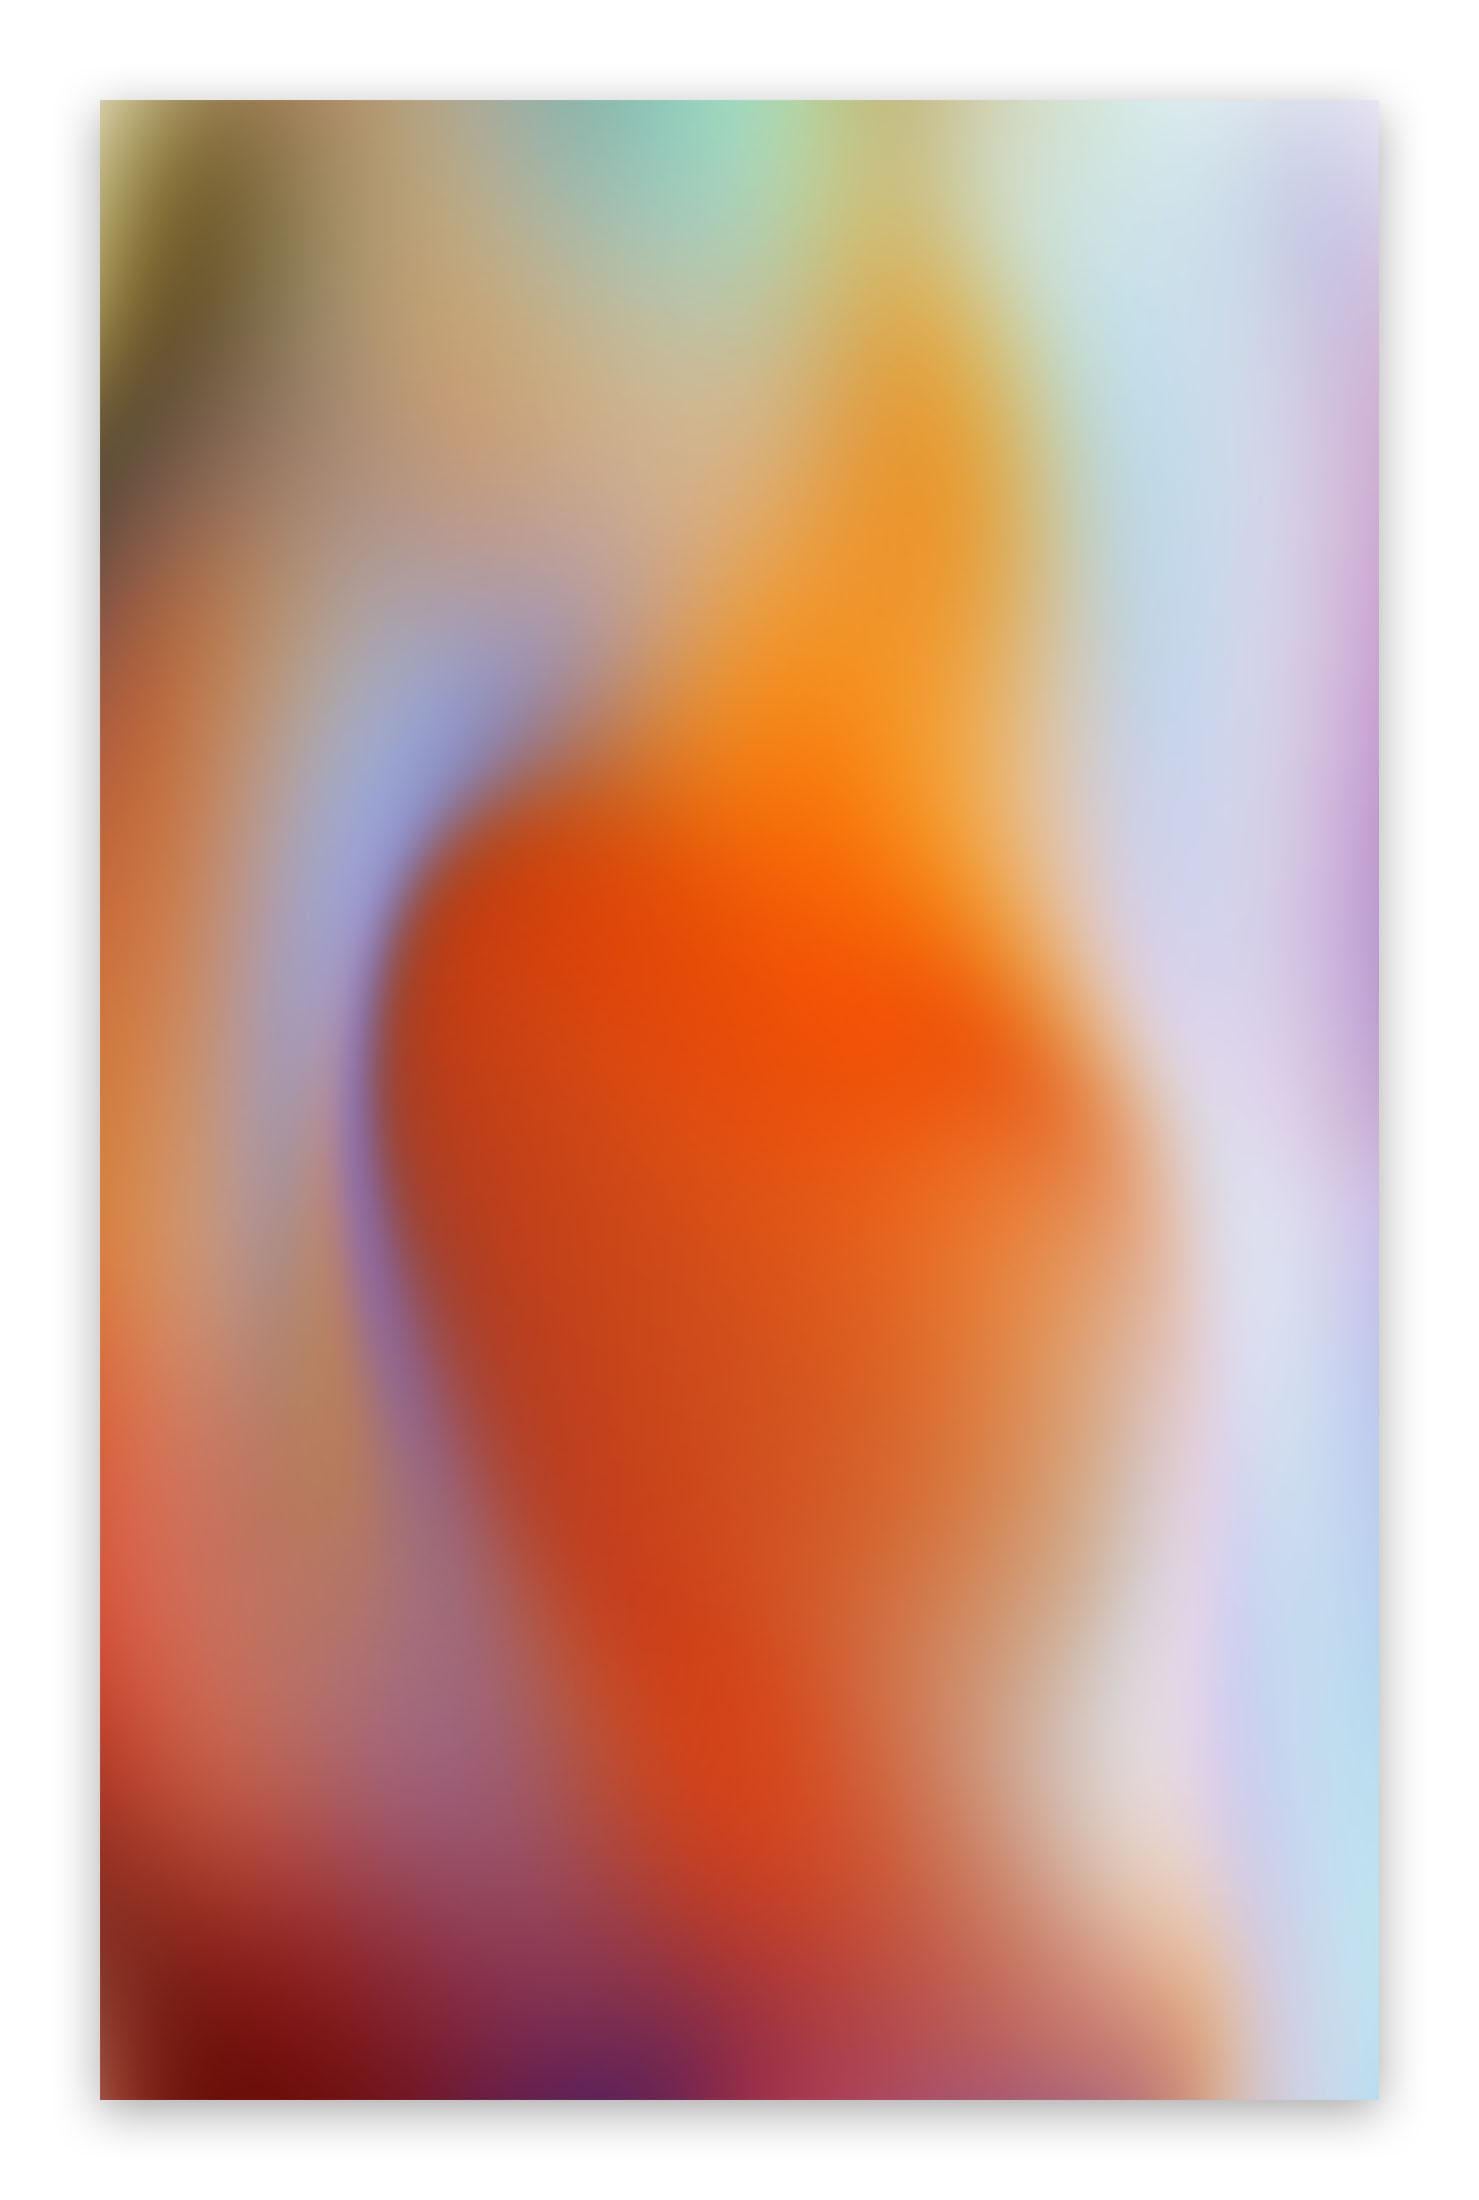 Bleed # 202005 (Abstract Photography)

Chromogenic Print Face-mounted 3mm Matte Plexiglas - Unframed.

Available on request - 4 week turnaround.

Backed with Dibond and C-channel hanging system + keyhole option.

Edition: 3/3.

Snell creates small